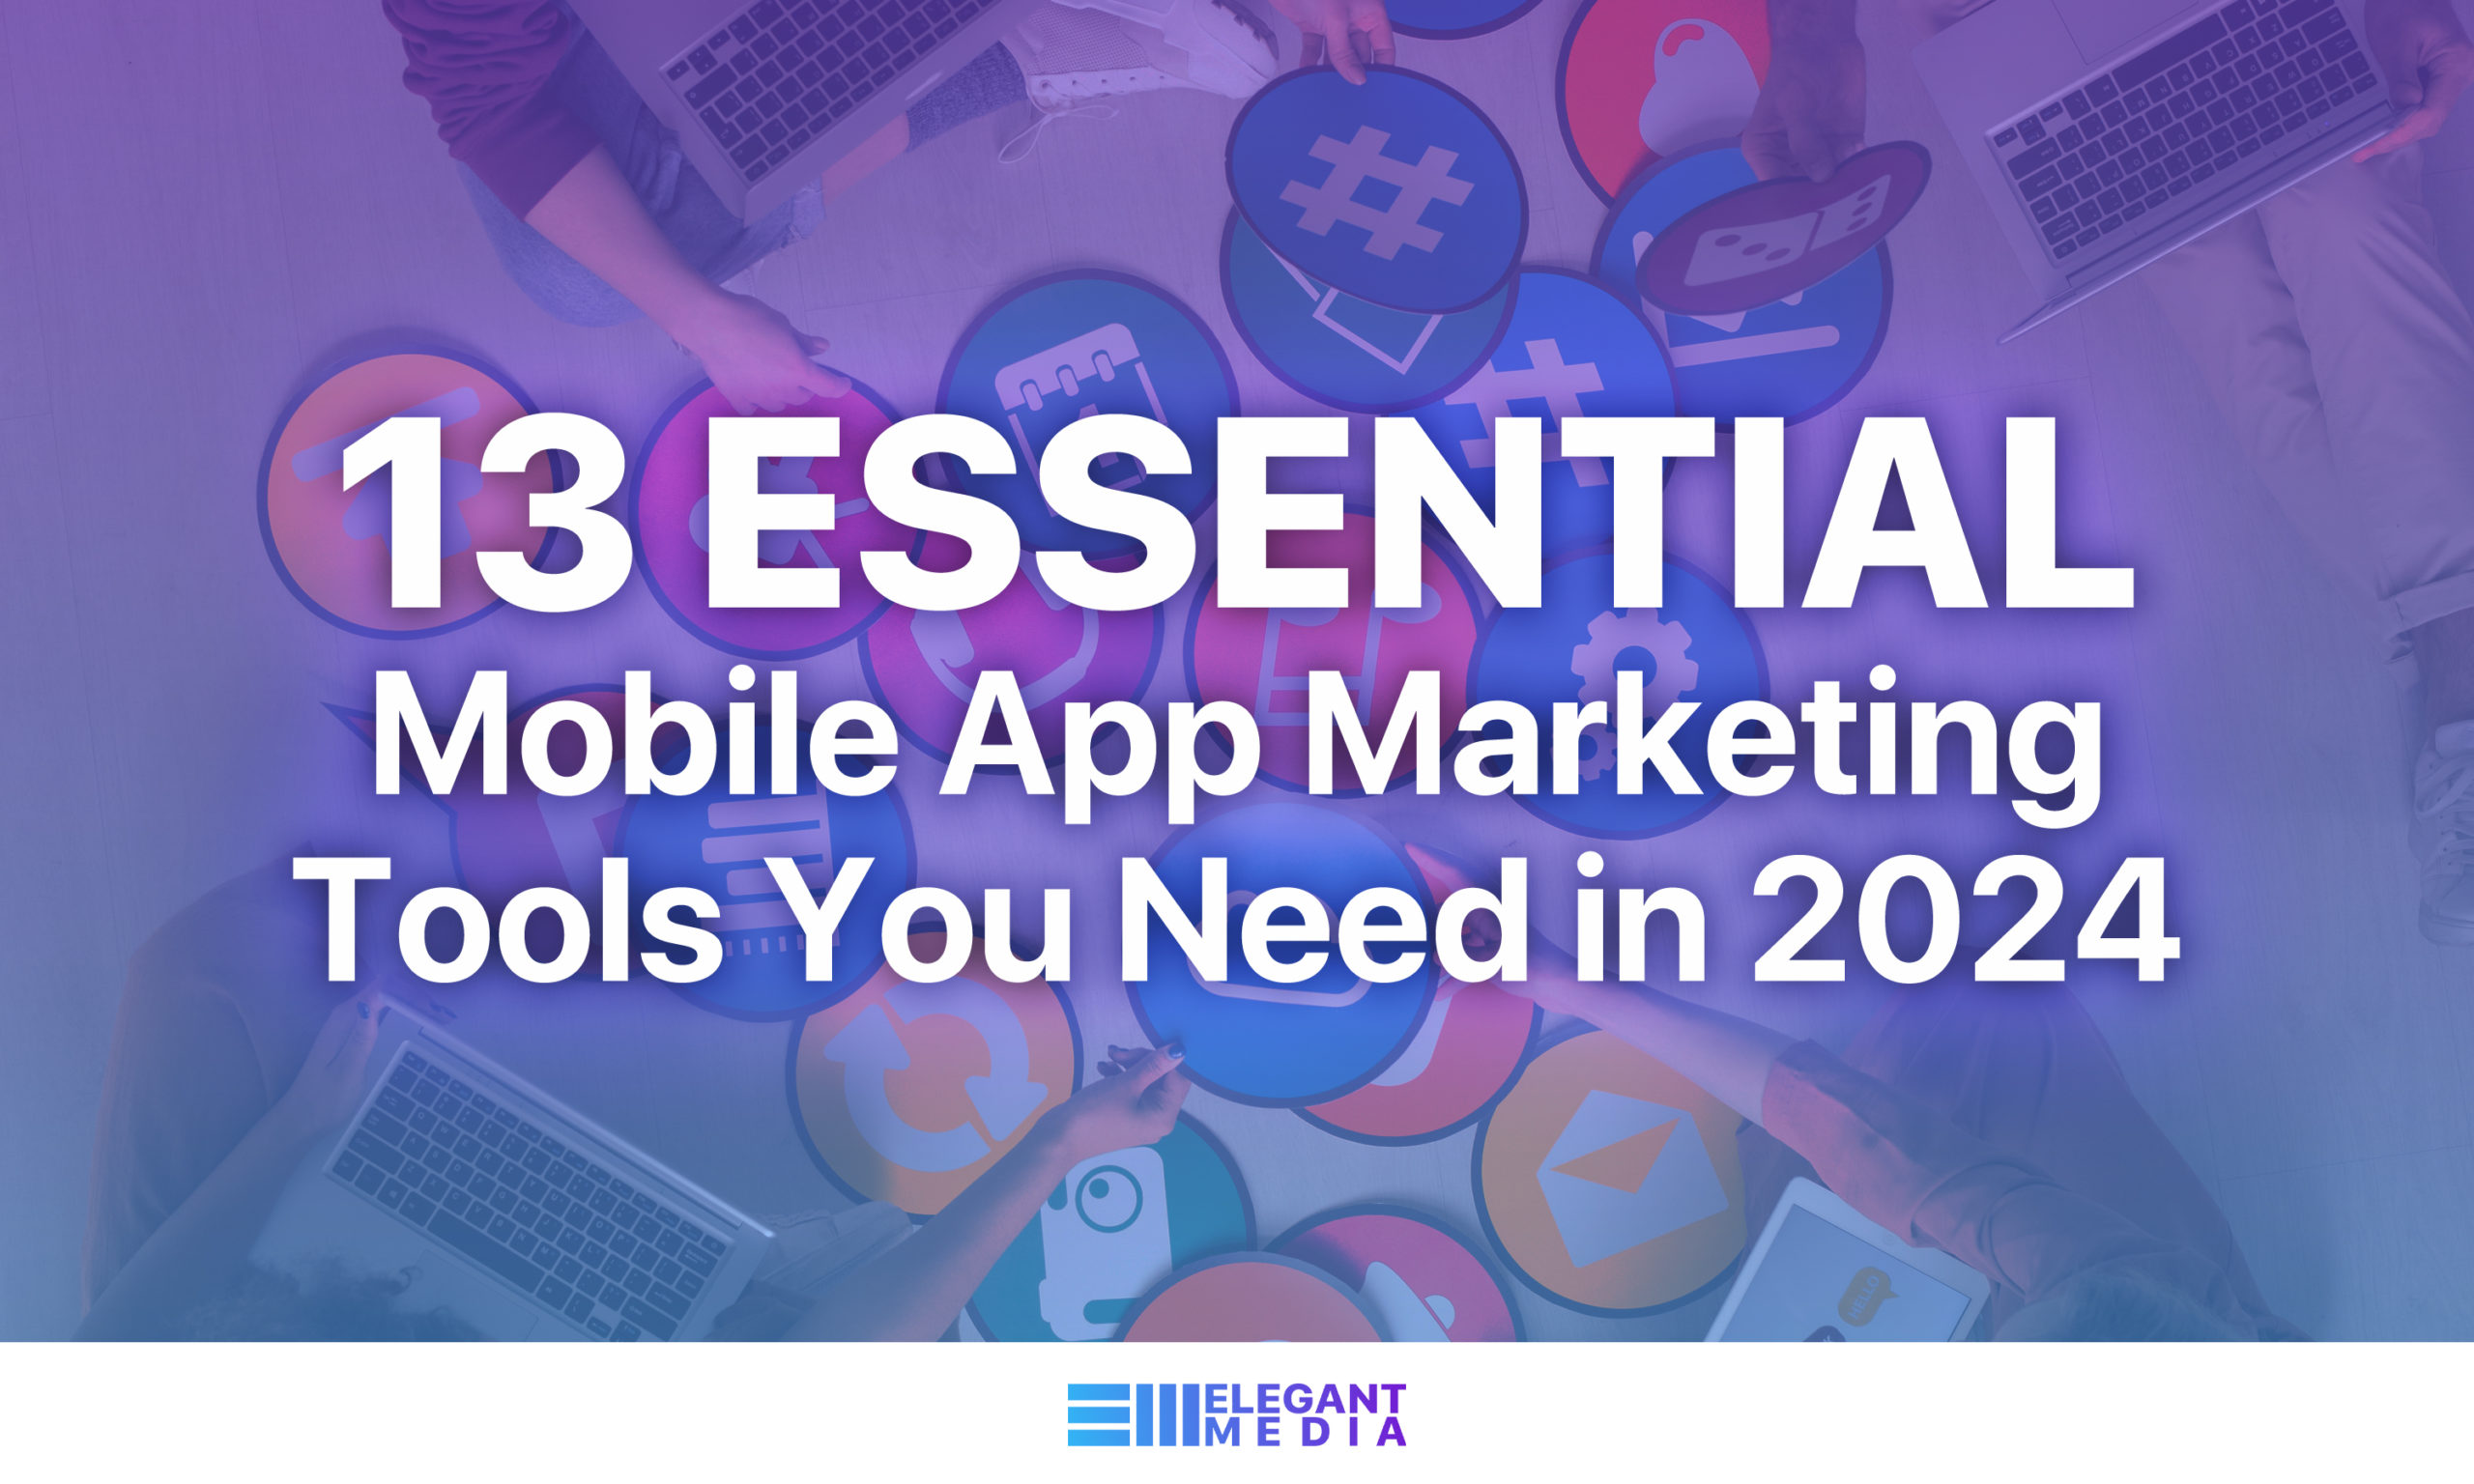 13 Essential Mobile App Marketing Tools You Need in 2024